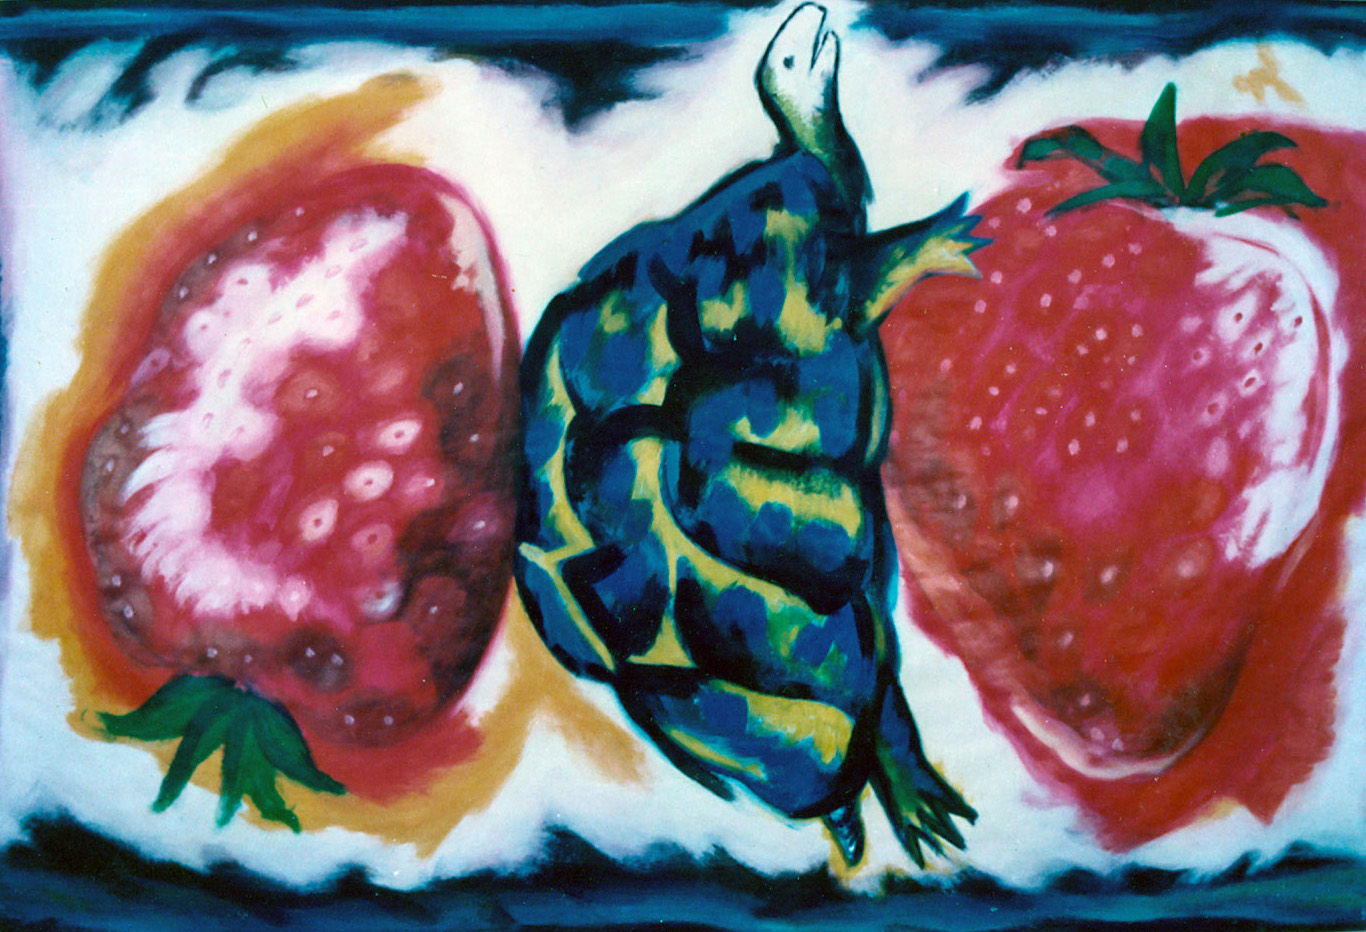 Title: Sandwich
Materials: Acrylic on paper
Size: 150x250 cm
Year: 1986